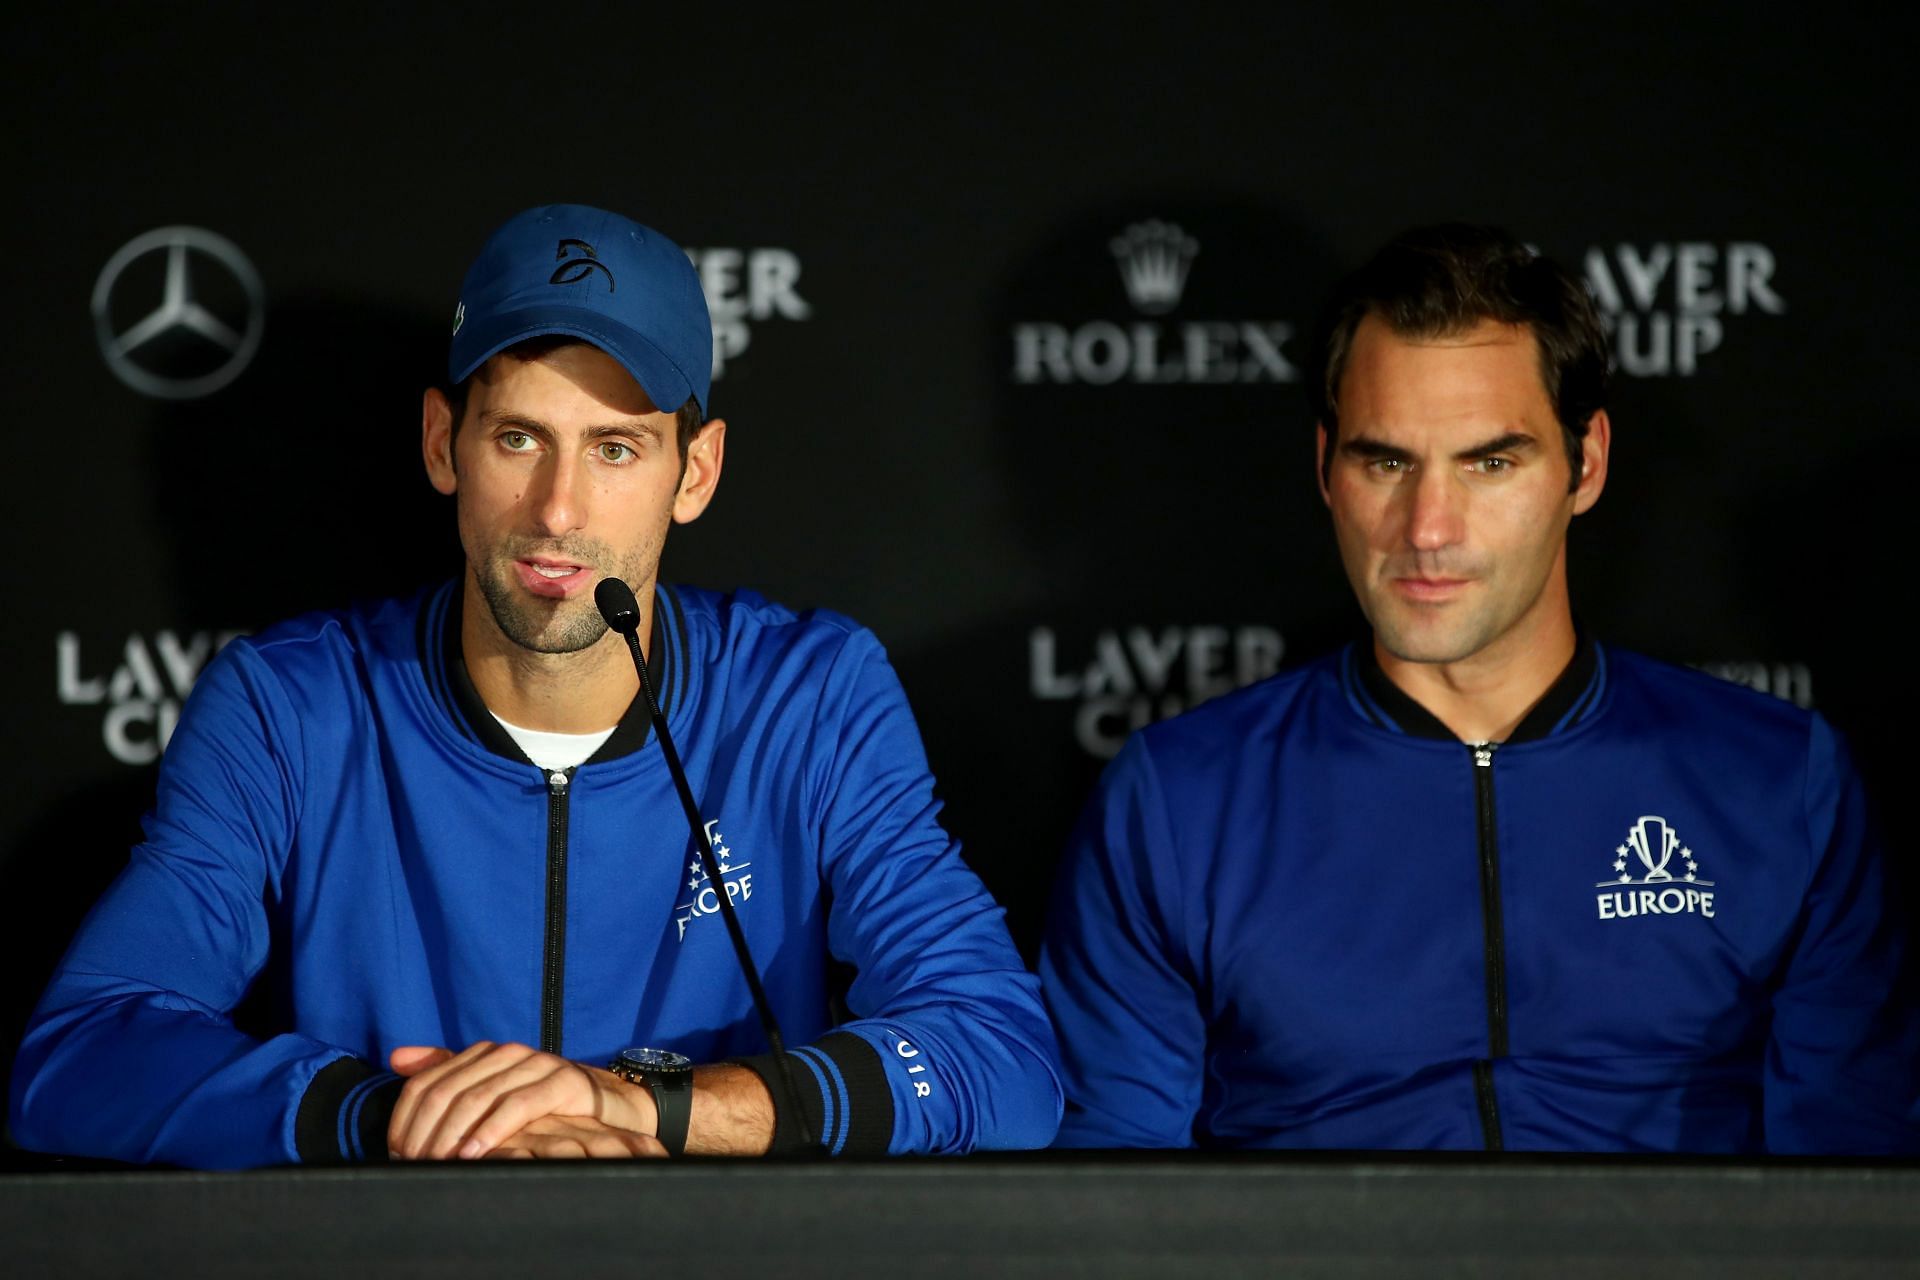 Novak Djokovic and Roger Federer at the 2018 Laver Cup